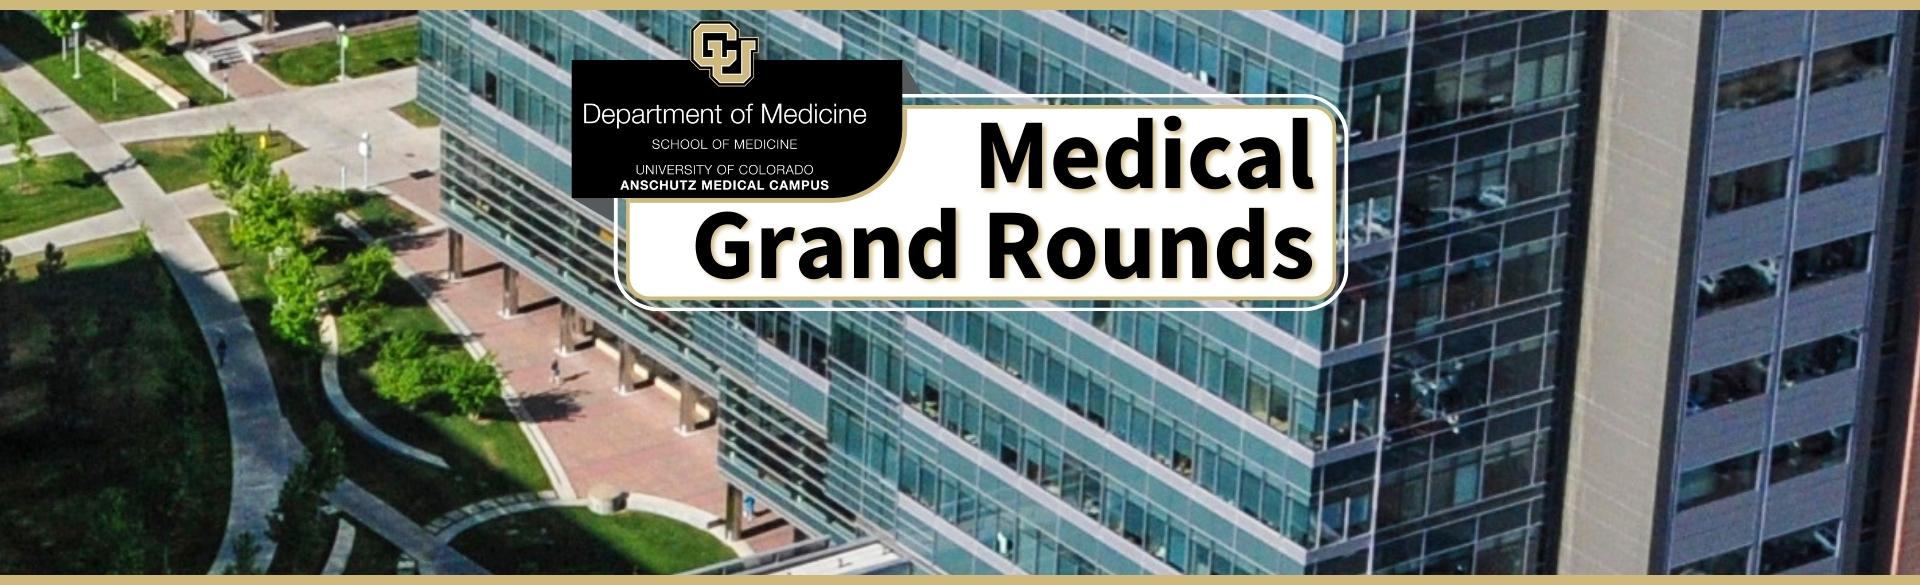 Department of Medicine Medical Grand Rounds